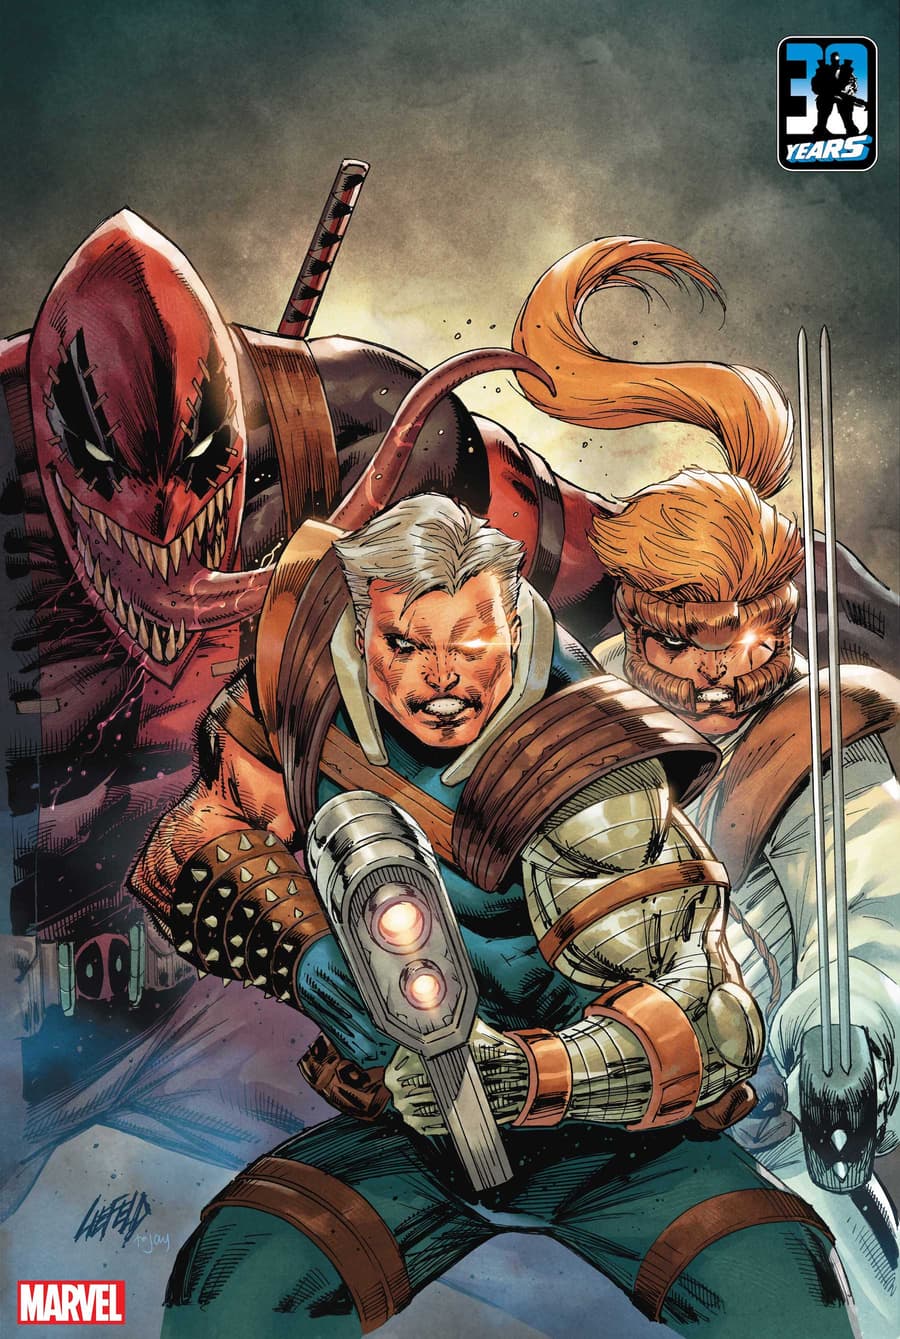 X-FORCE: KILLSHOT #1 variant cover by Rob Liefeld